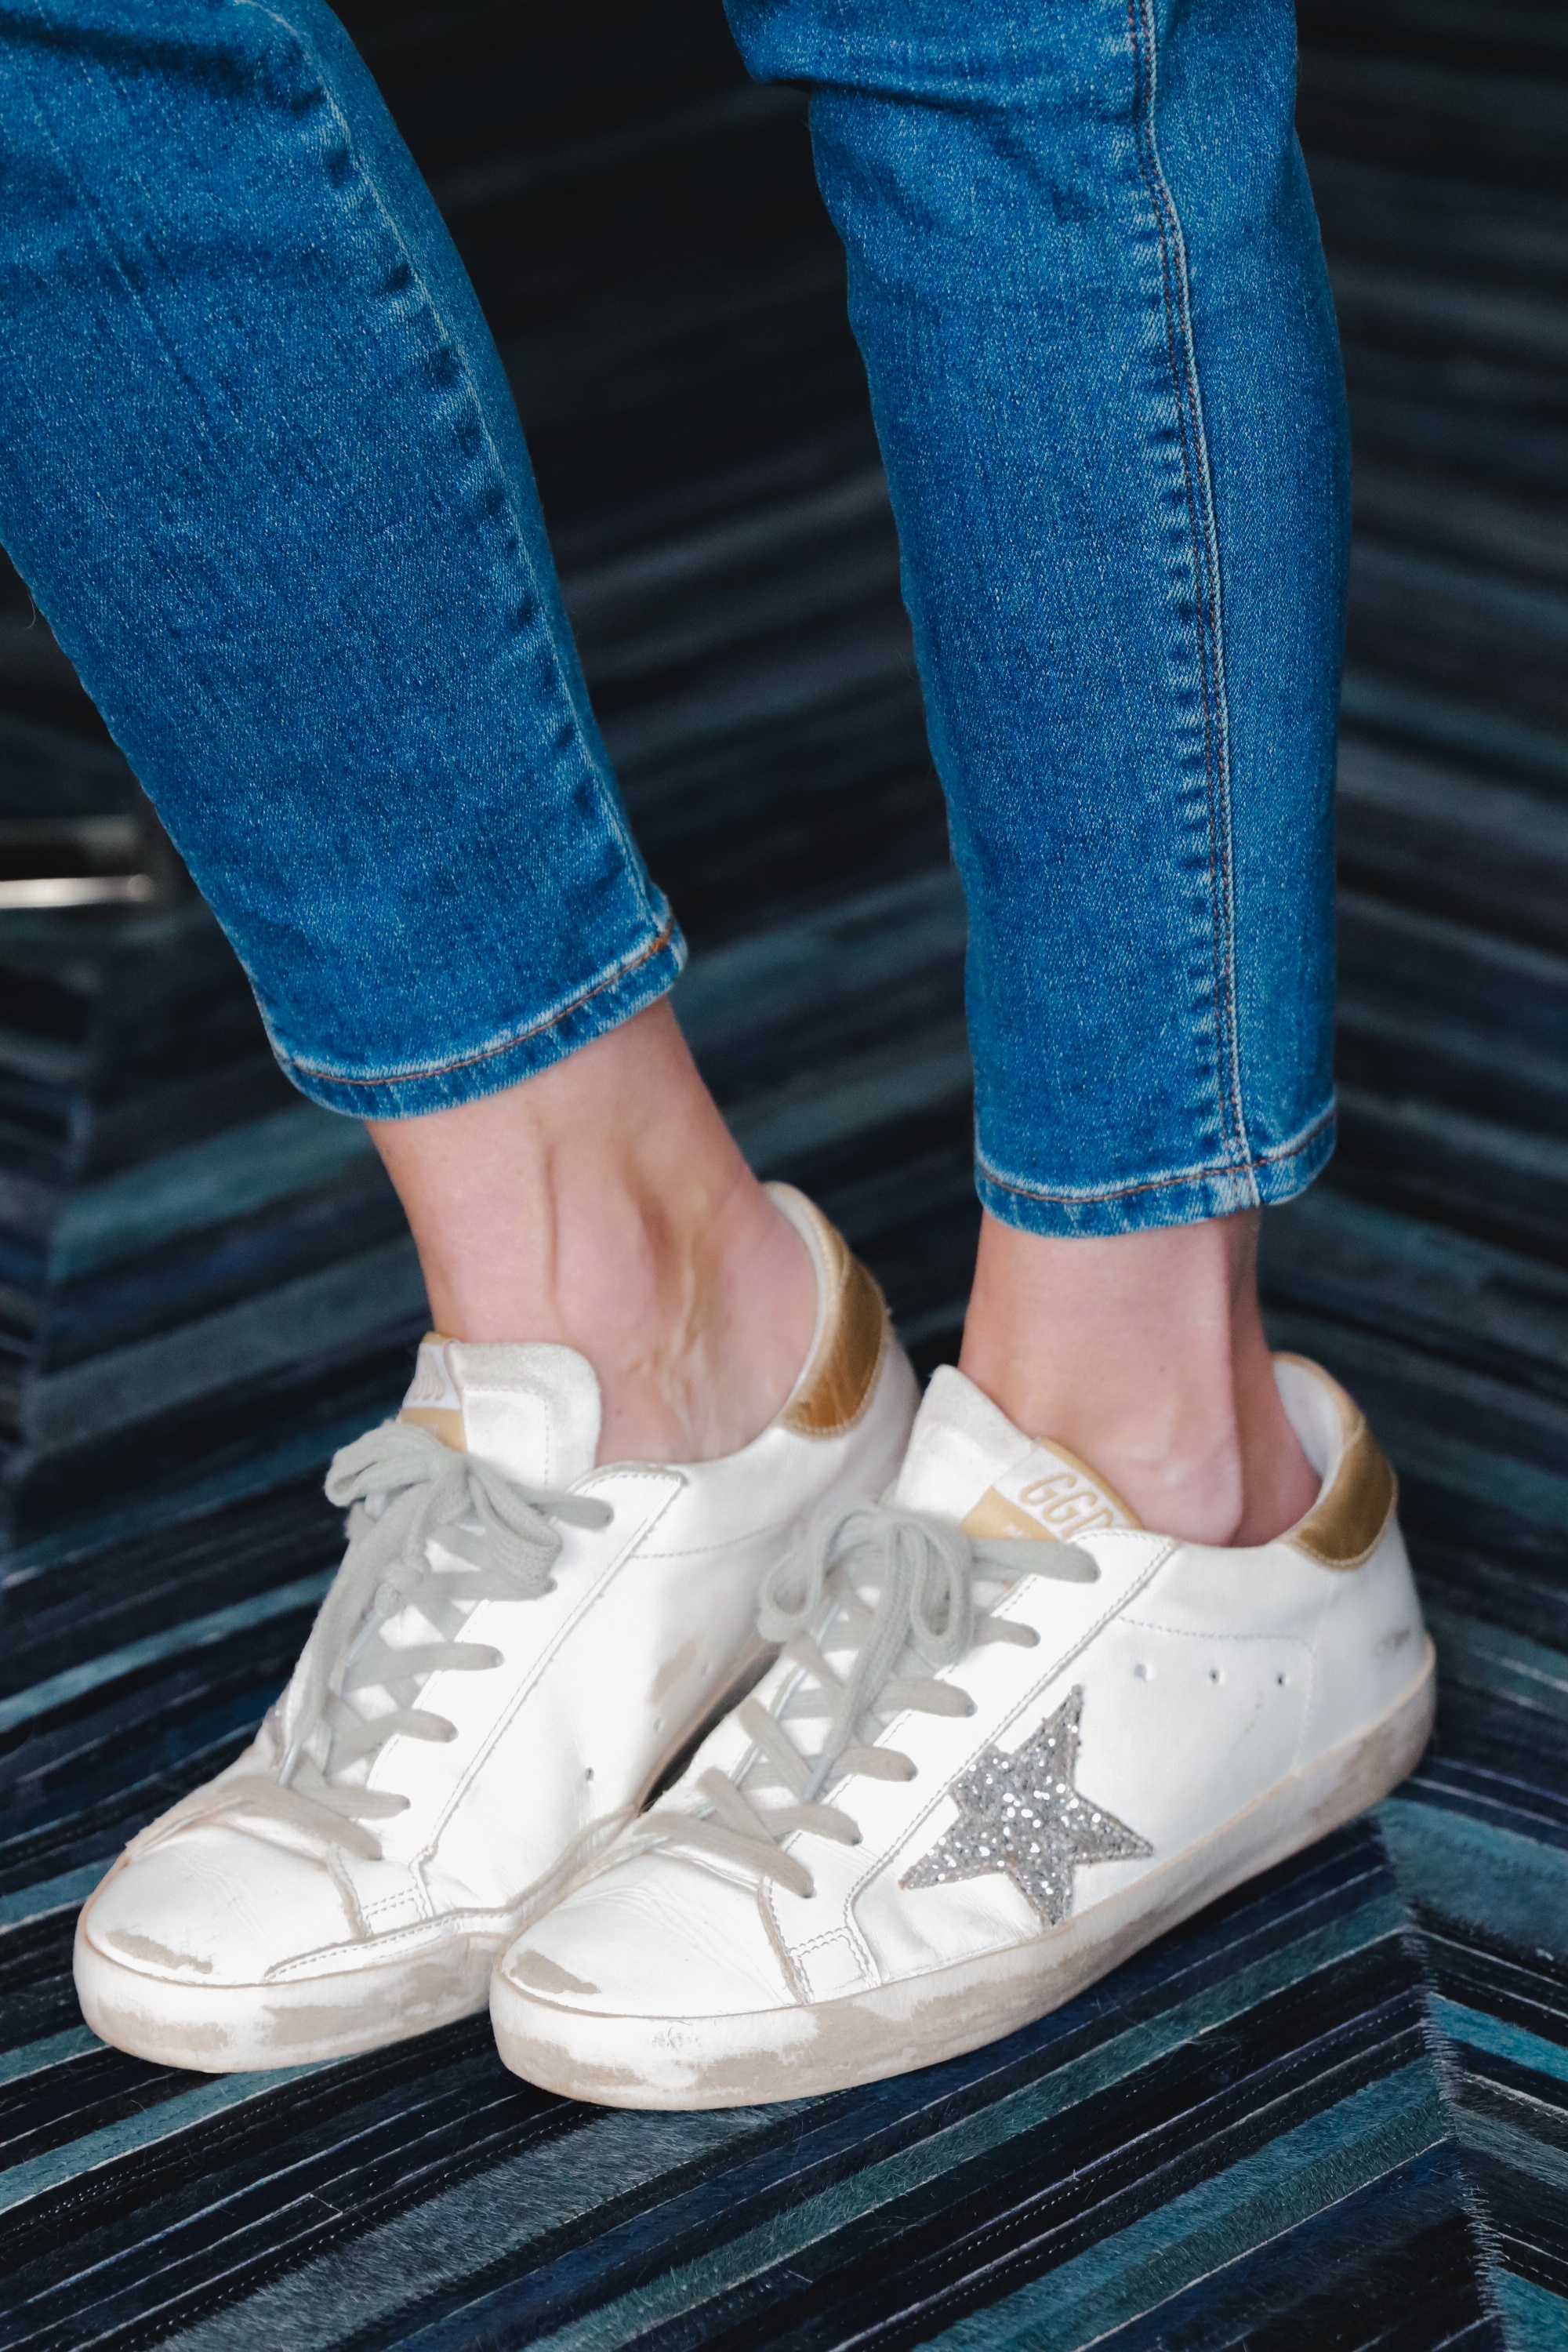 white golden goose all star low top sneakers with J Brand Natasha skinny blue jeans